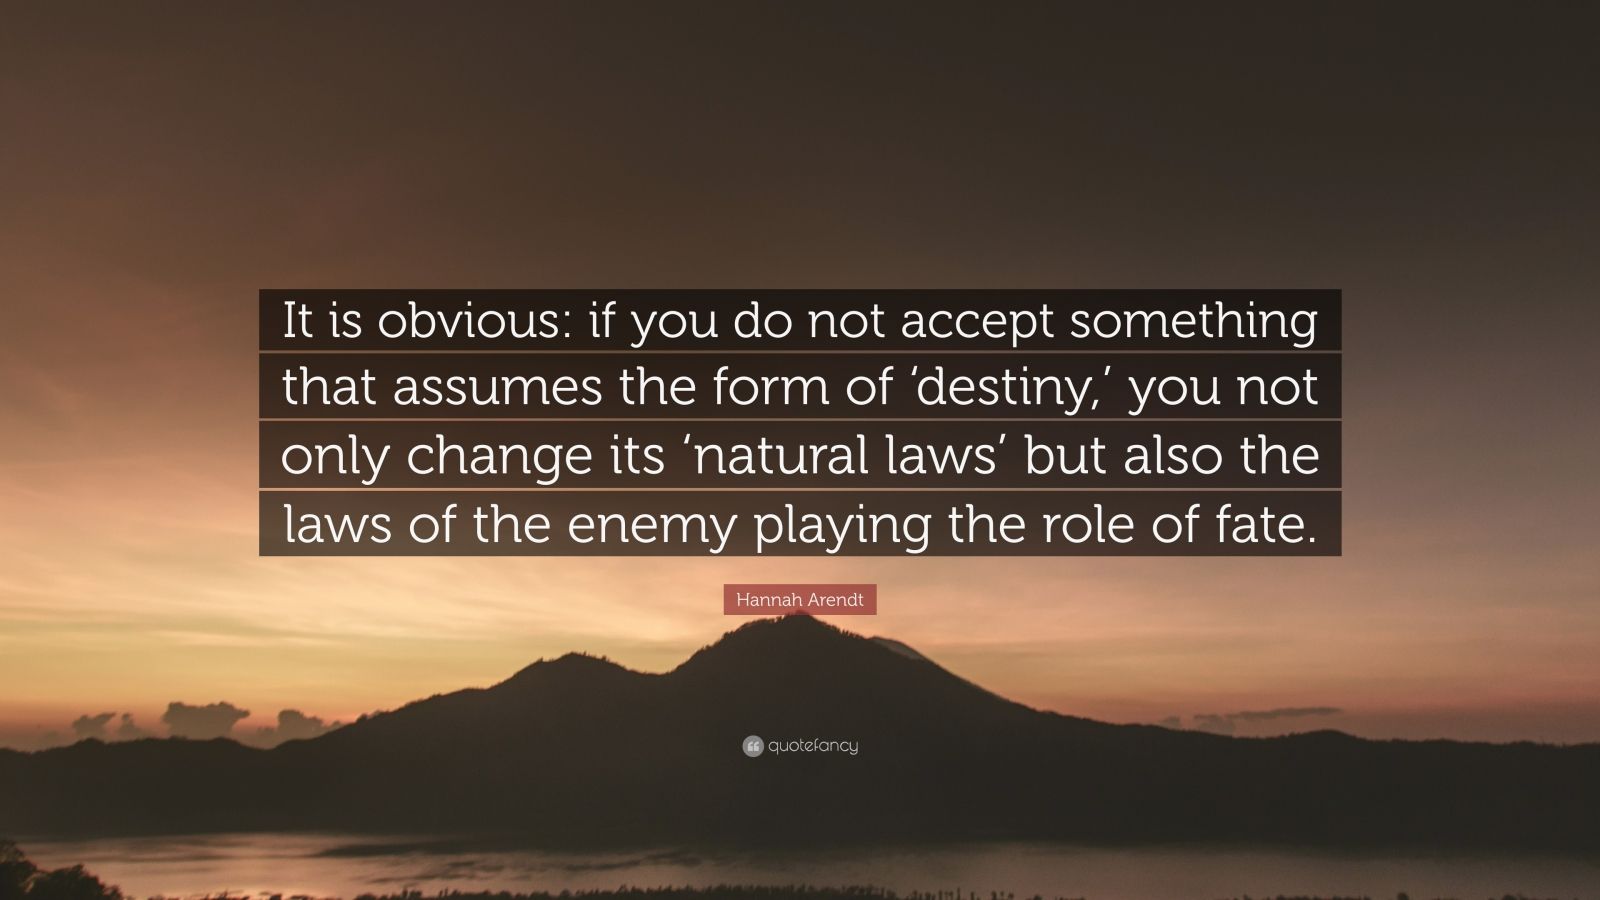 Hannah Arendt Quote: “It is obvious: if you do not accept something ...